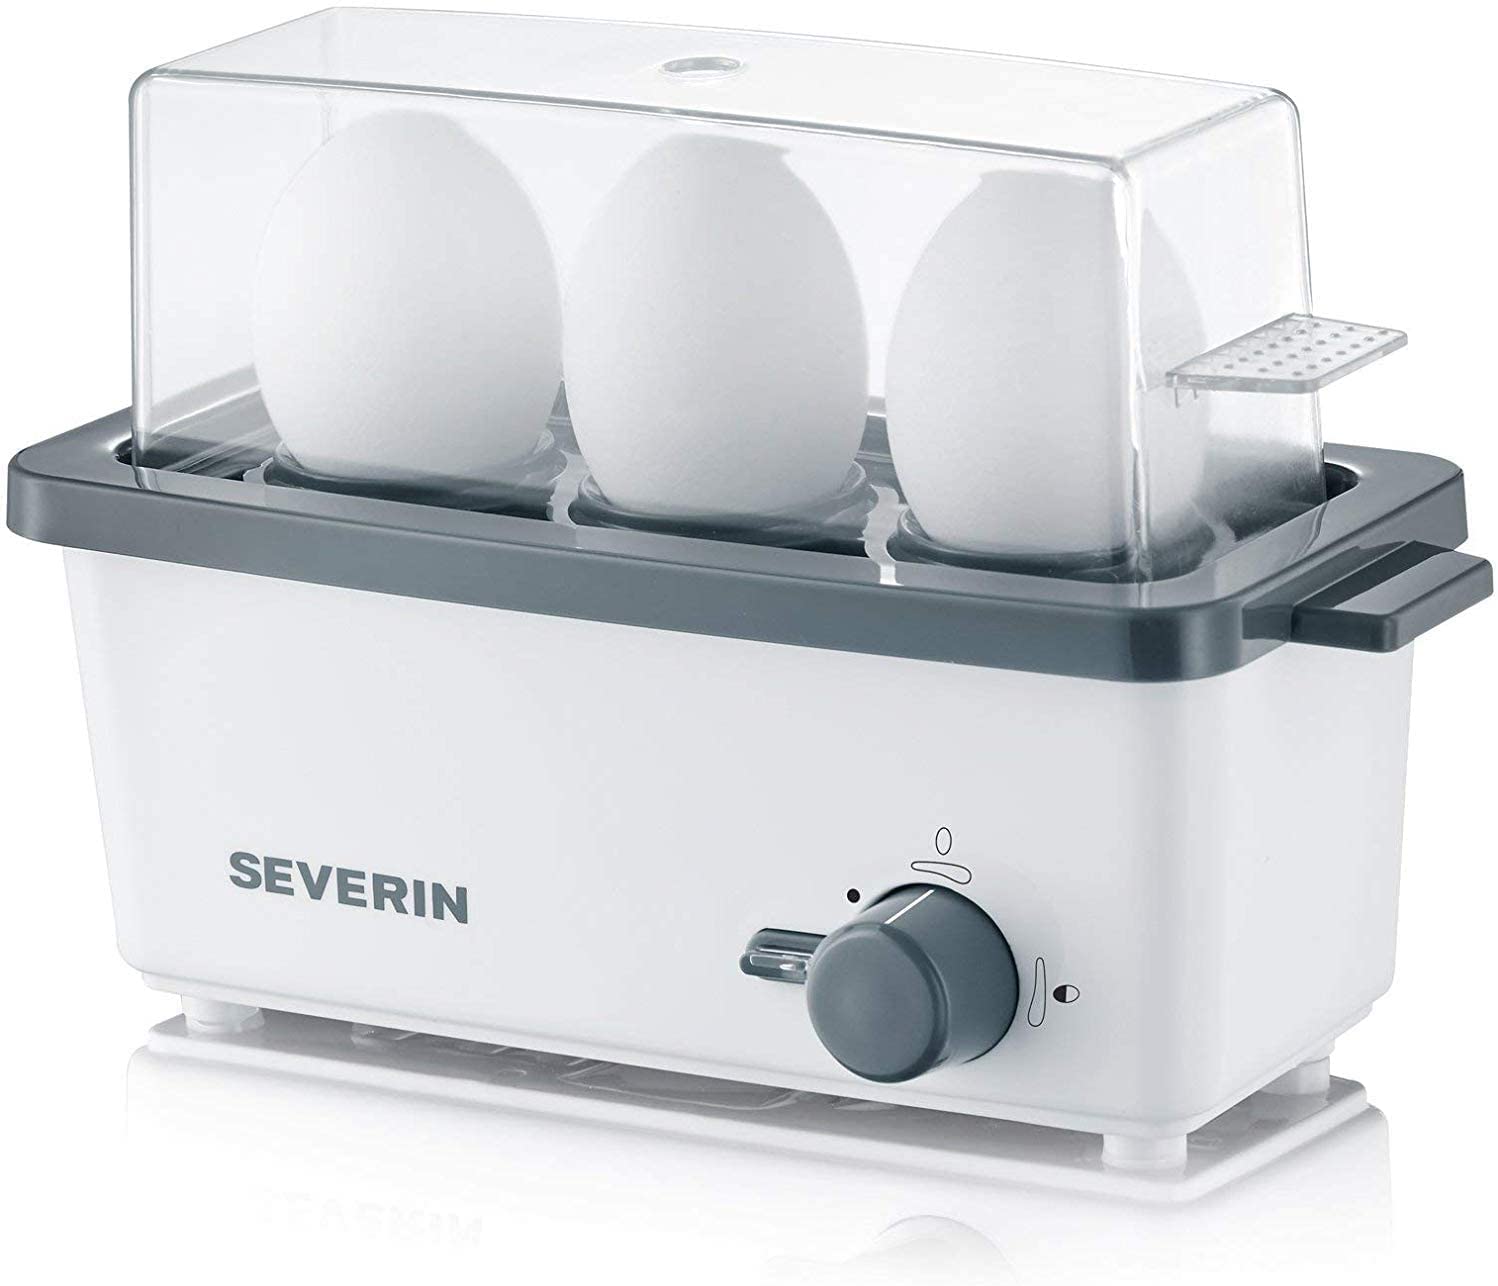 SEVERIN EK 3163 Egg Cooker for 3 Eggs with Electronic Cooking Time Monitoring, Includes Measuring Cup with Egg Piercer, Egg Cooker for Ideal Hardness Level, Brushed Stainless Steel/Black, 300 W